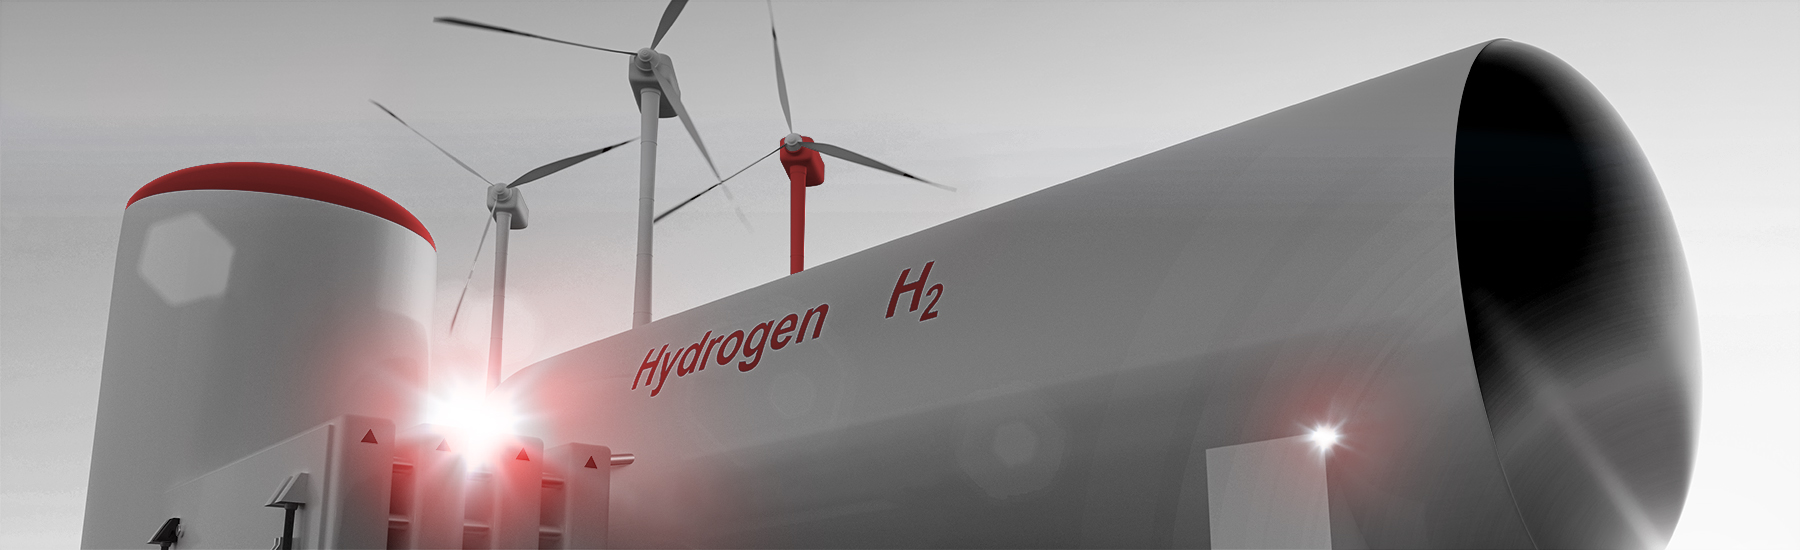 AVAT Hydrogen H2 CROSS SECTOR SOLUTIONS to control and regulate innovative energy systems